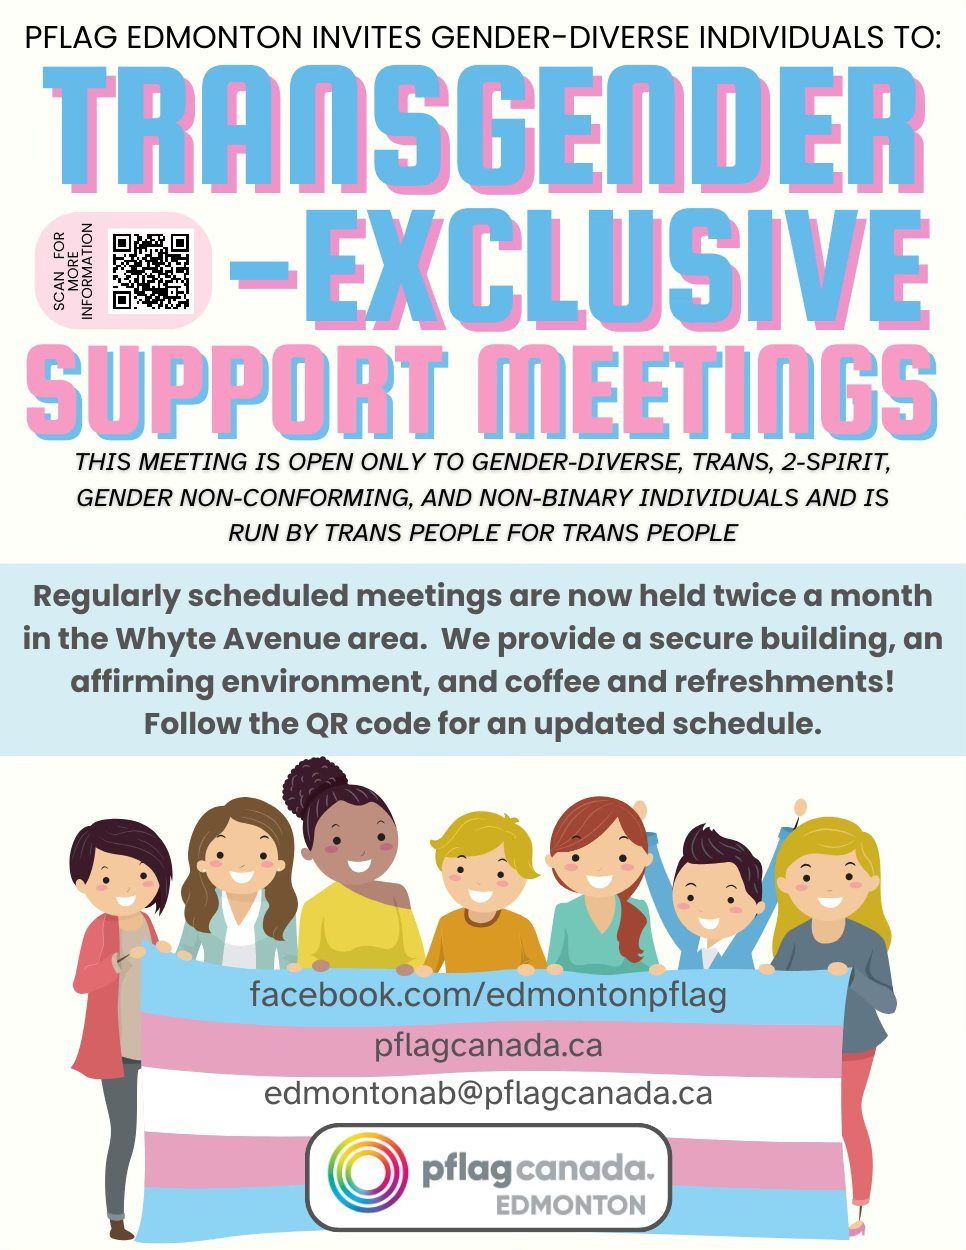 Transgender-Exclusive Support and Social Meet Up!